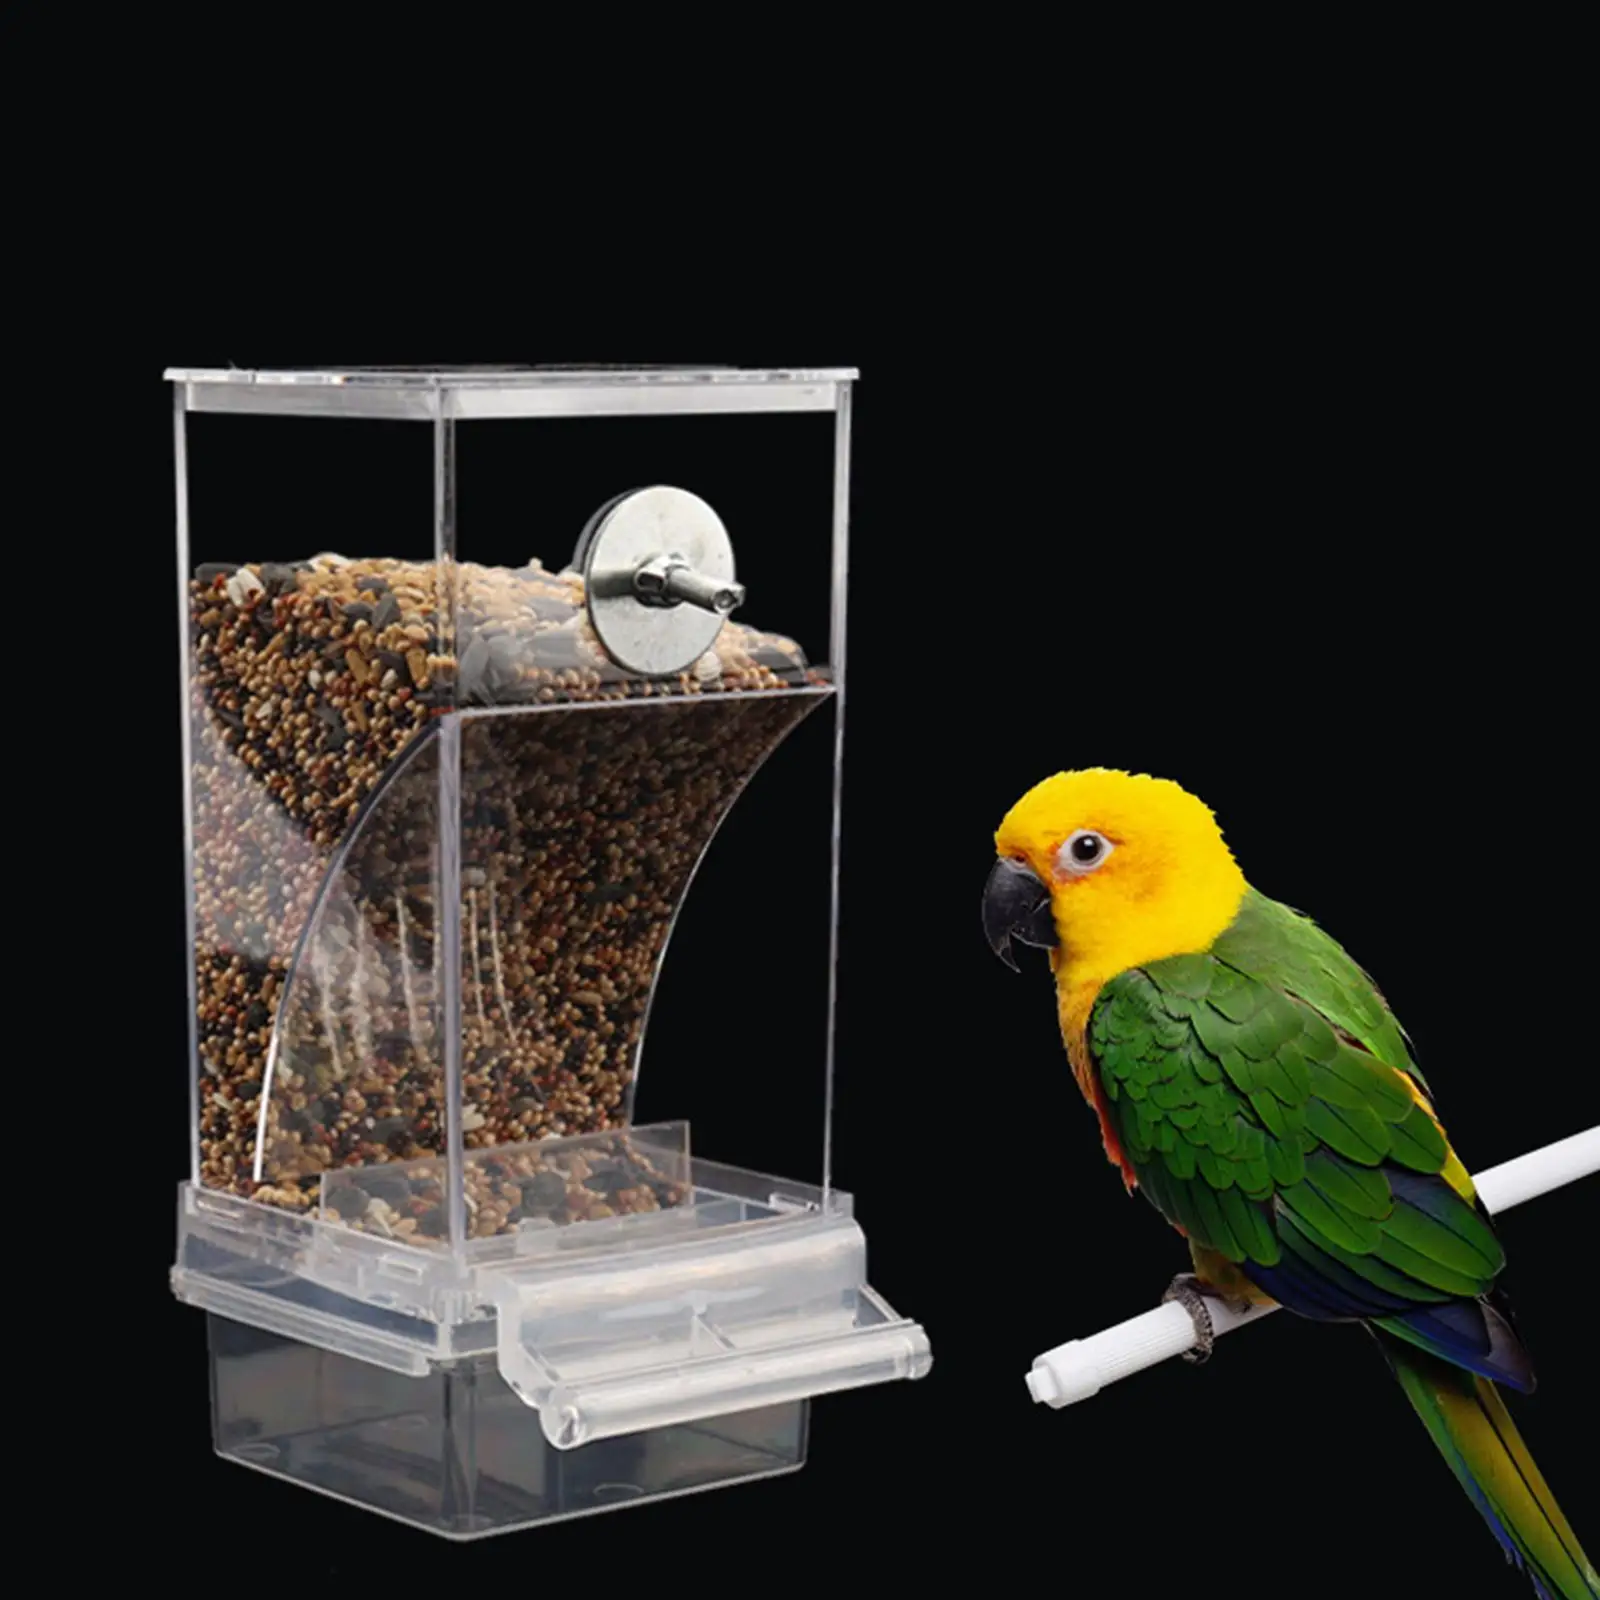 Hamiledyi No Mess Bird Seed Feeder Parrot Feeder Cage Accessories Supplies with Perch for Parakeet Canary Cockatiel Finch 